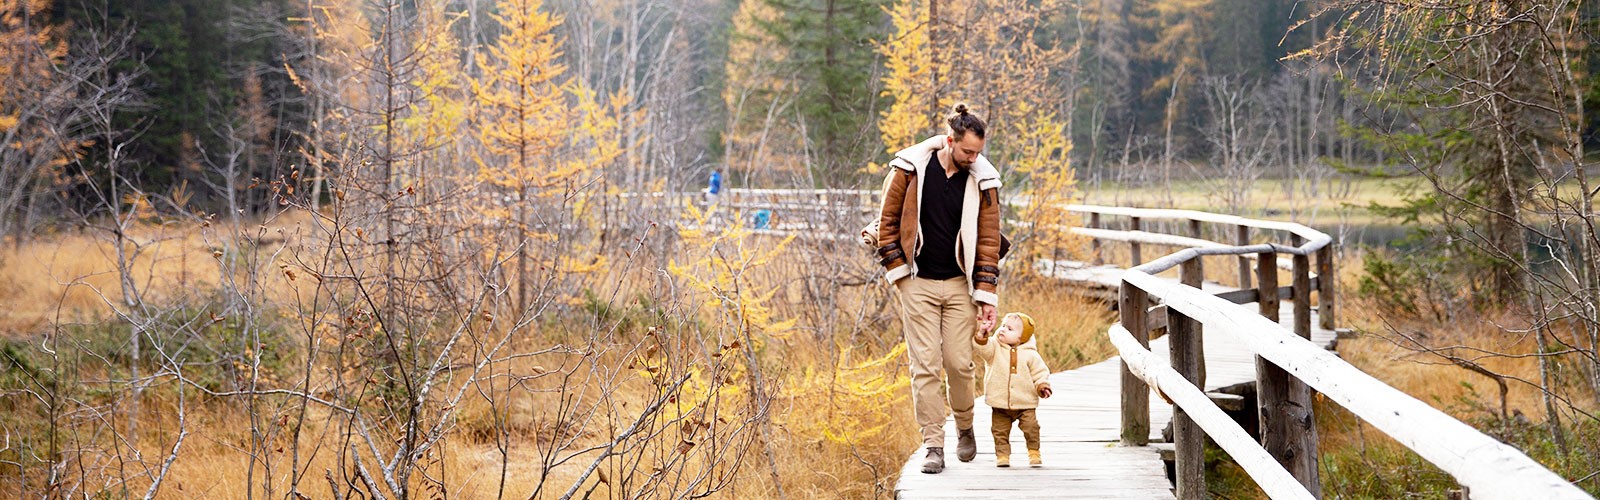 Photo Of Man Walking On Wooden Bridge with child in Fall